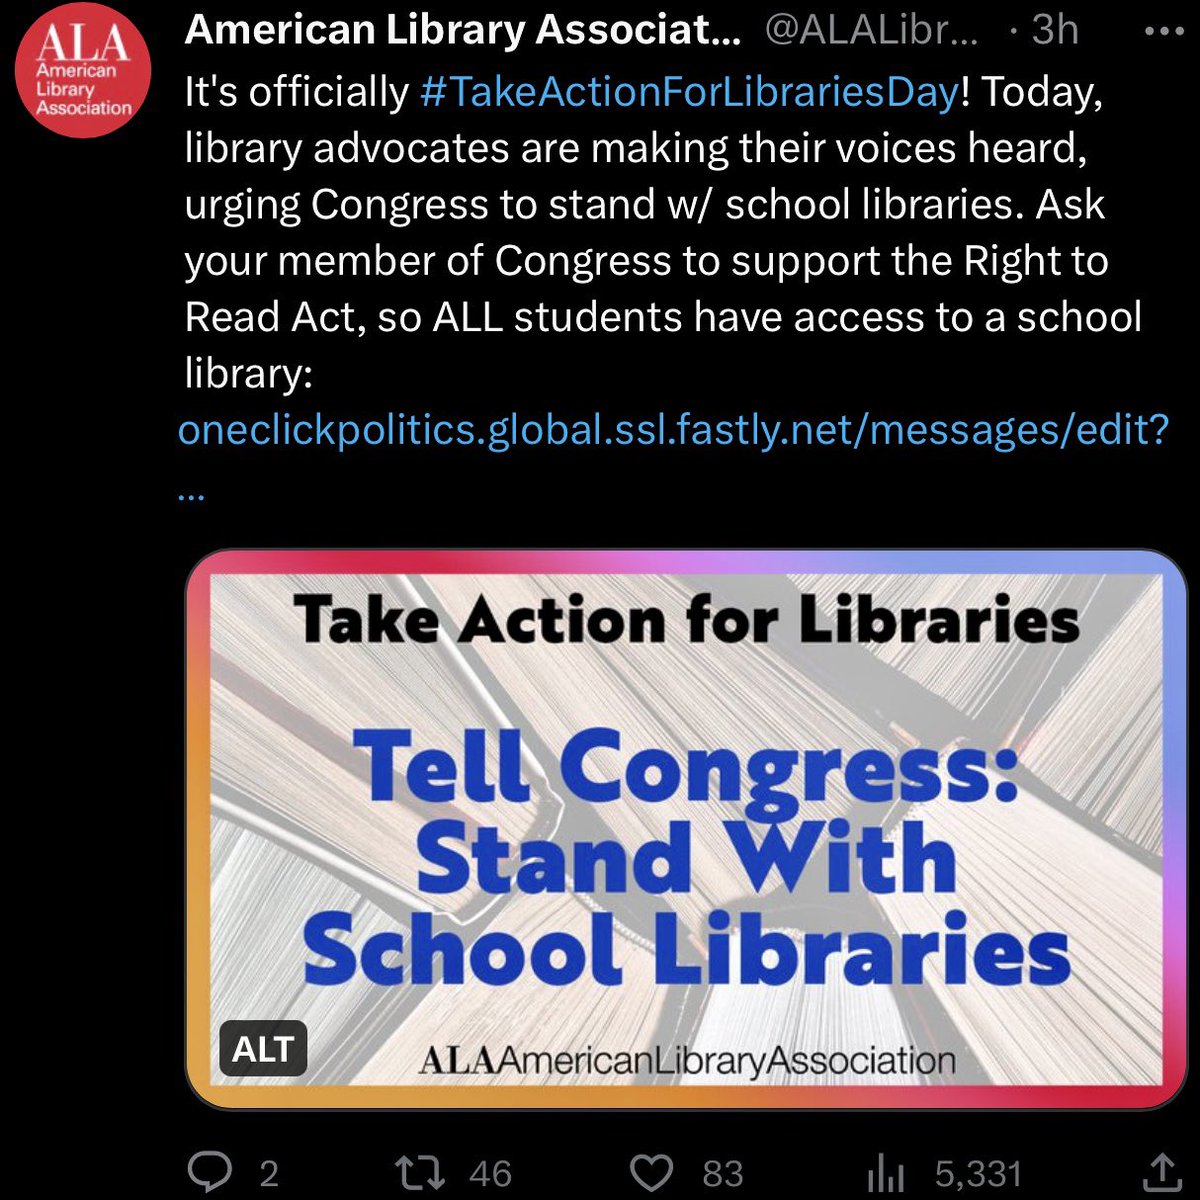 GROOMER LIBRARIANS NOW DEMAND OVER HALF A BILLION DOLLARS FROM TAXPAYERS! $600,000,000! FOR MORE #CRT #EQUITY + P*RN IN SCHOOLS!

#TakeActionForLibrariesDay

#RightToReadAct WILL PREVENT PARENTS FROM CHALLENGING CHILD P*RN BOOKS IN SCHOOLS!

#parenting #moms #dads #edchat